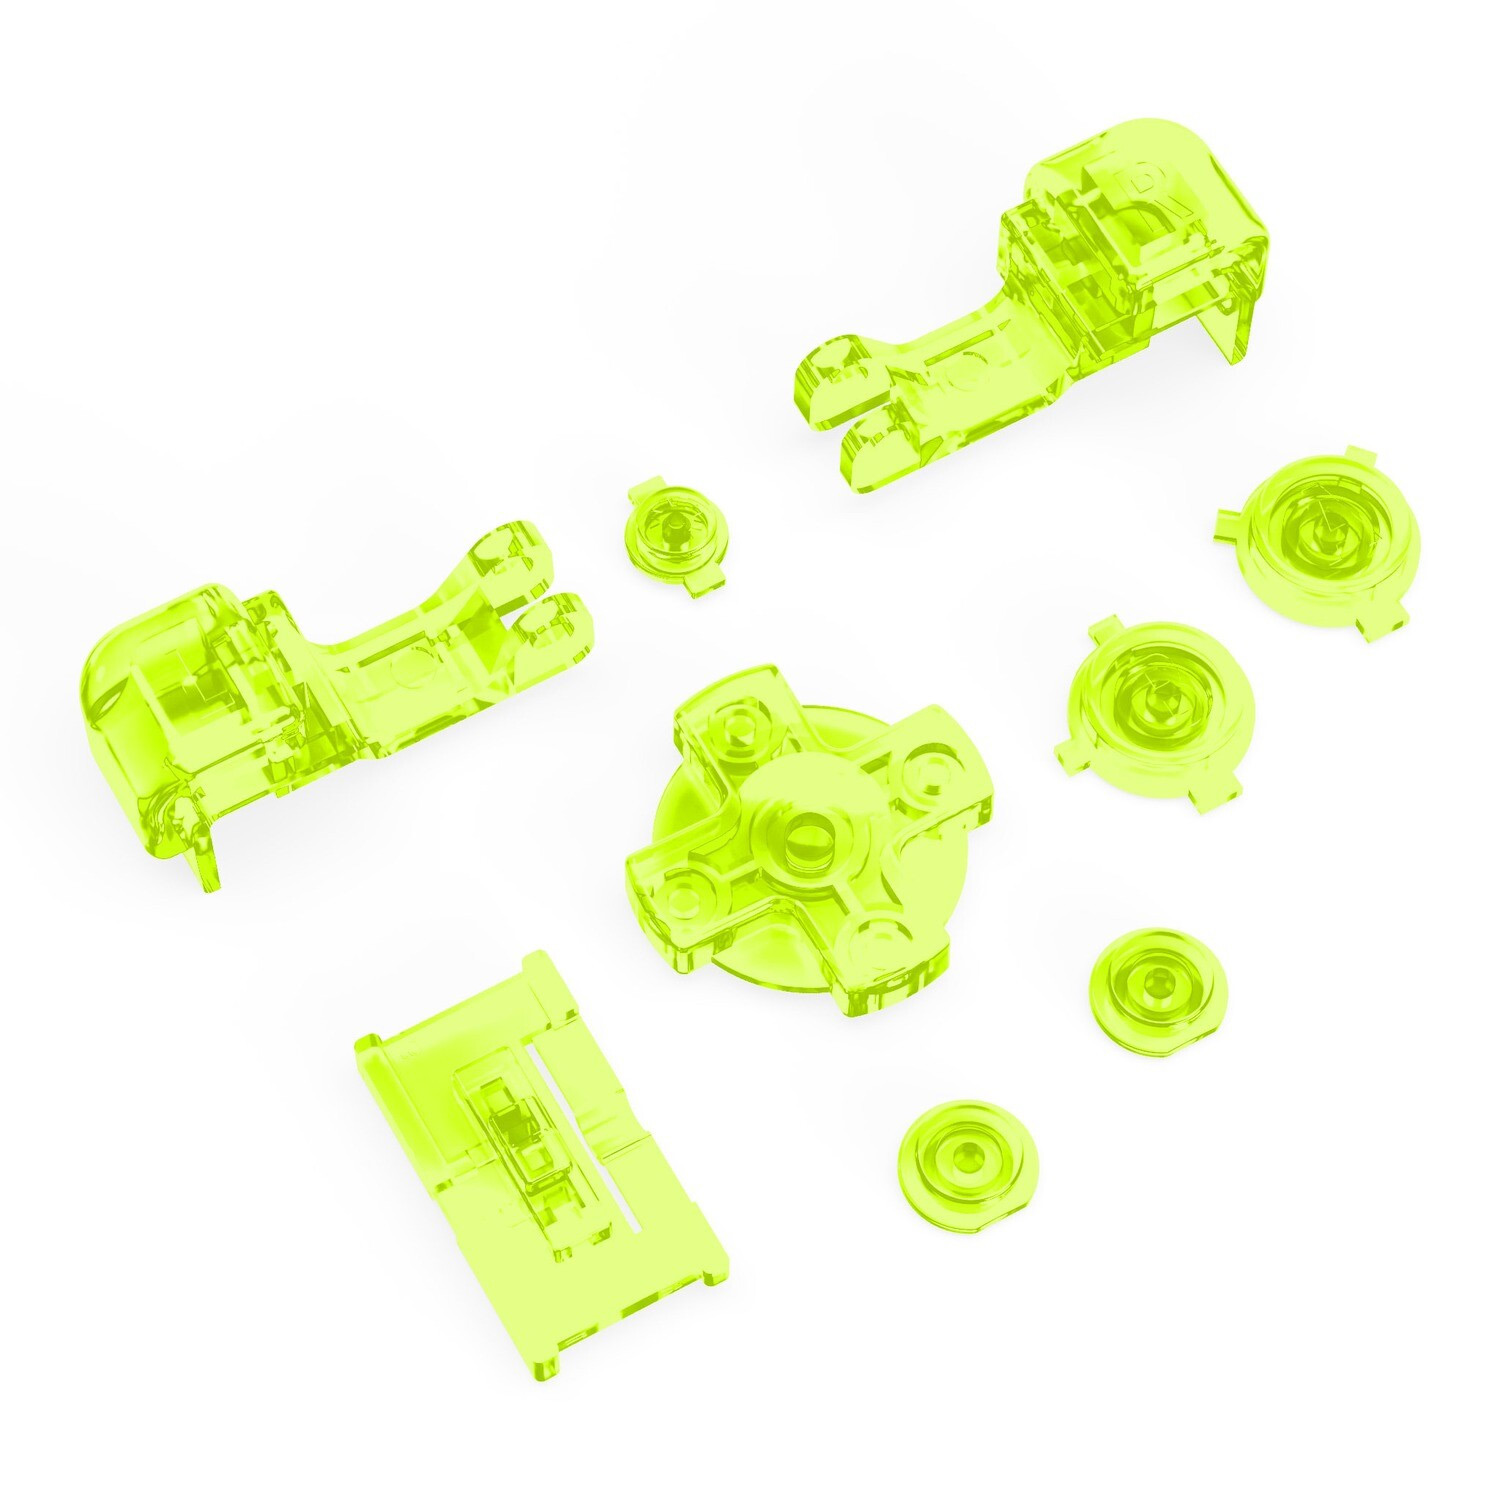 Game Boy Advance SP Buttons (Clear Yellow)